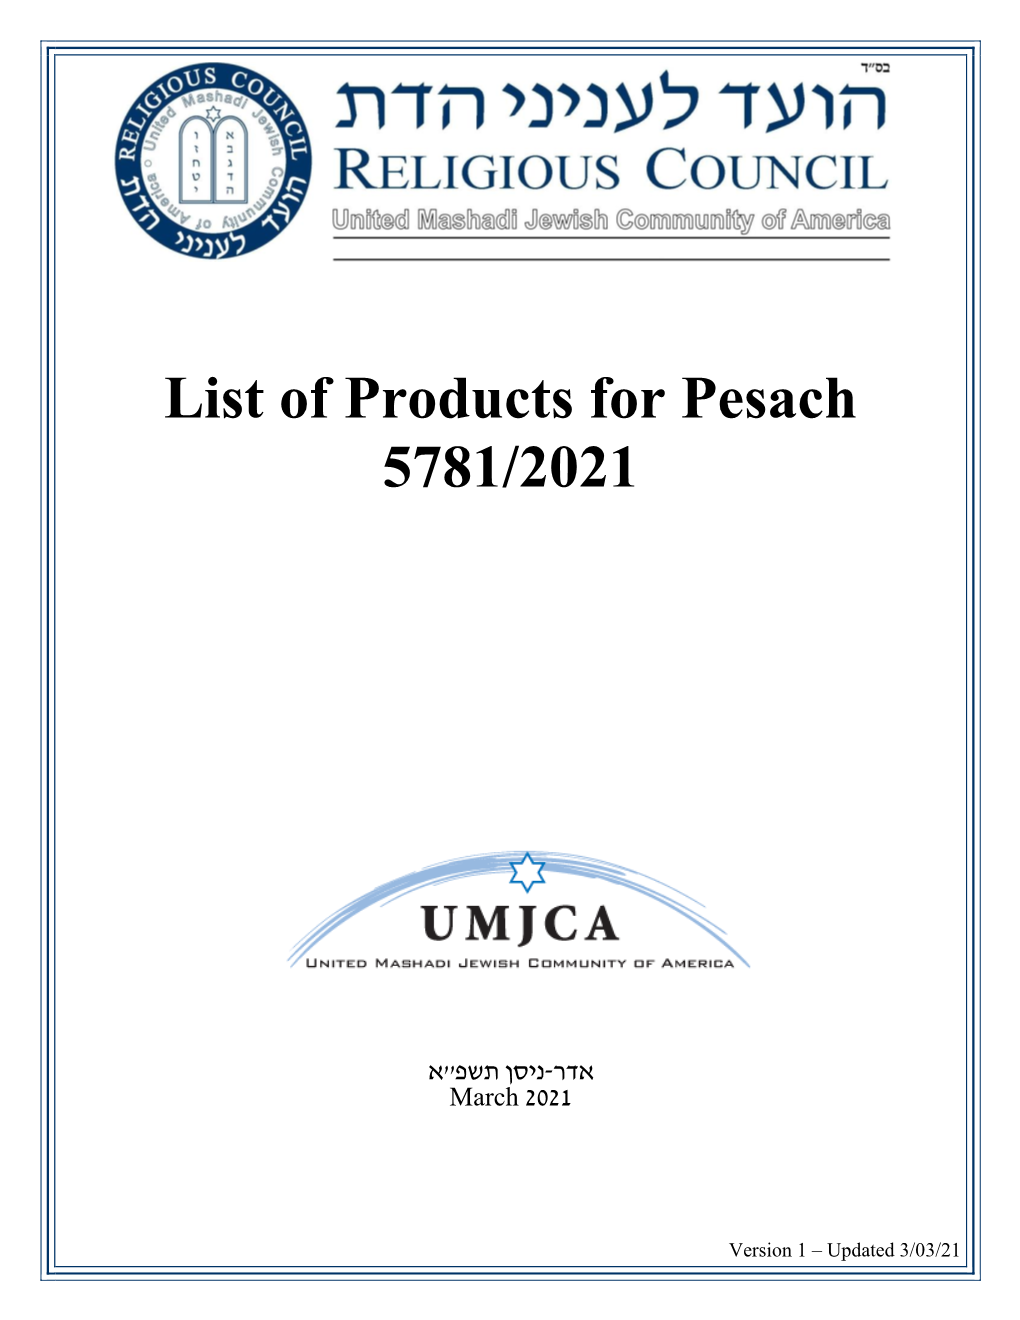 List of Products for Pesach 5781/2021